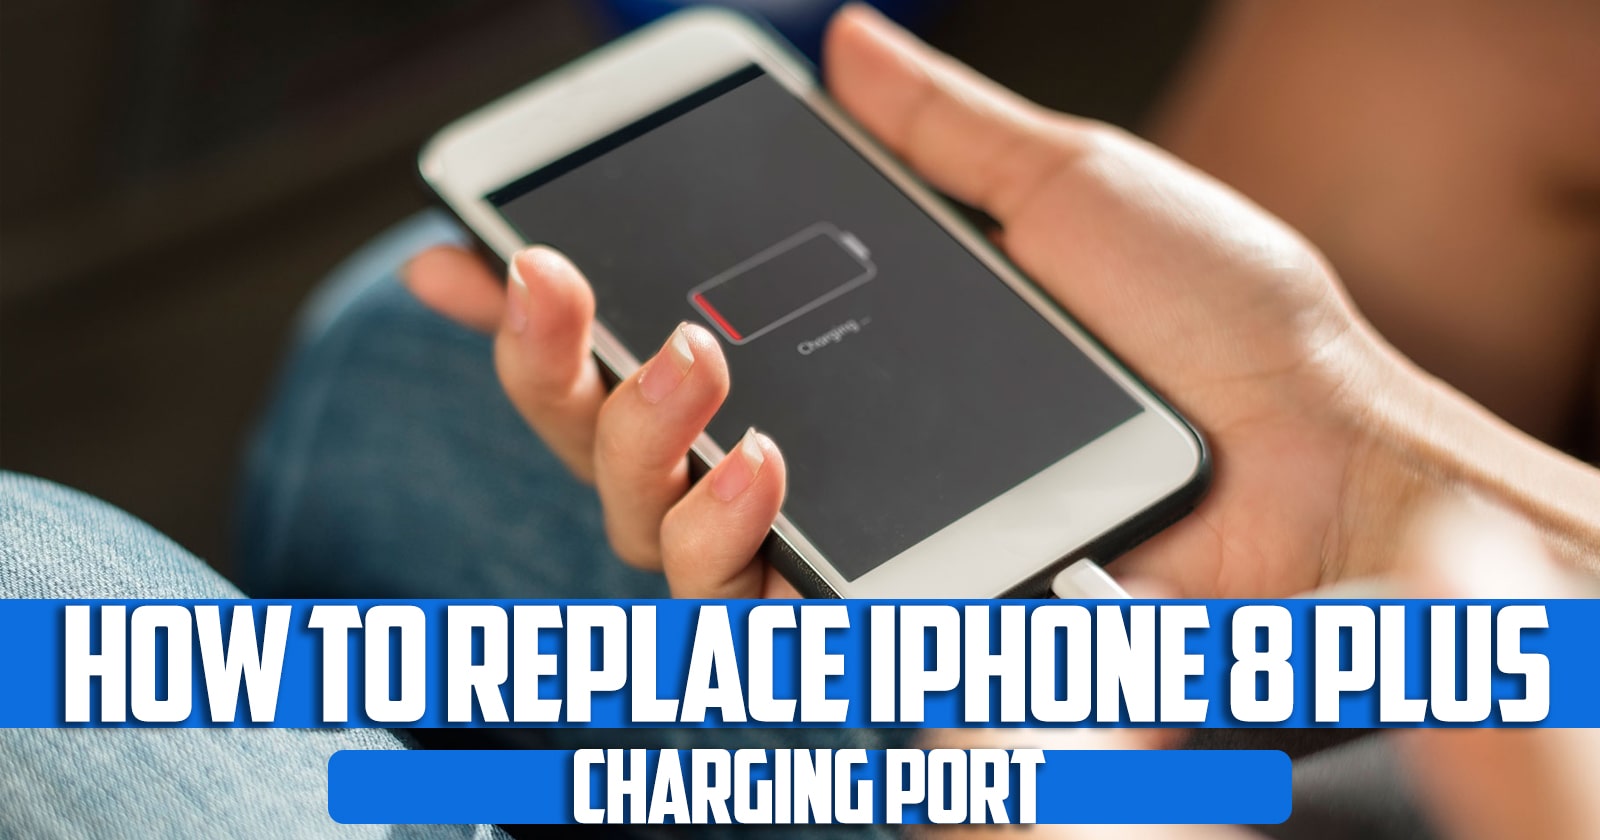 How to Replace iPhone 8 Plus Charging Port